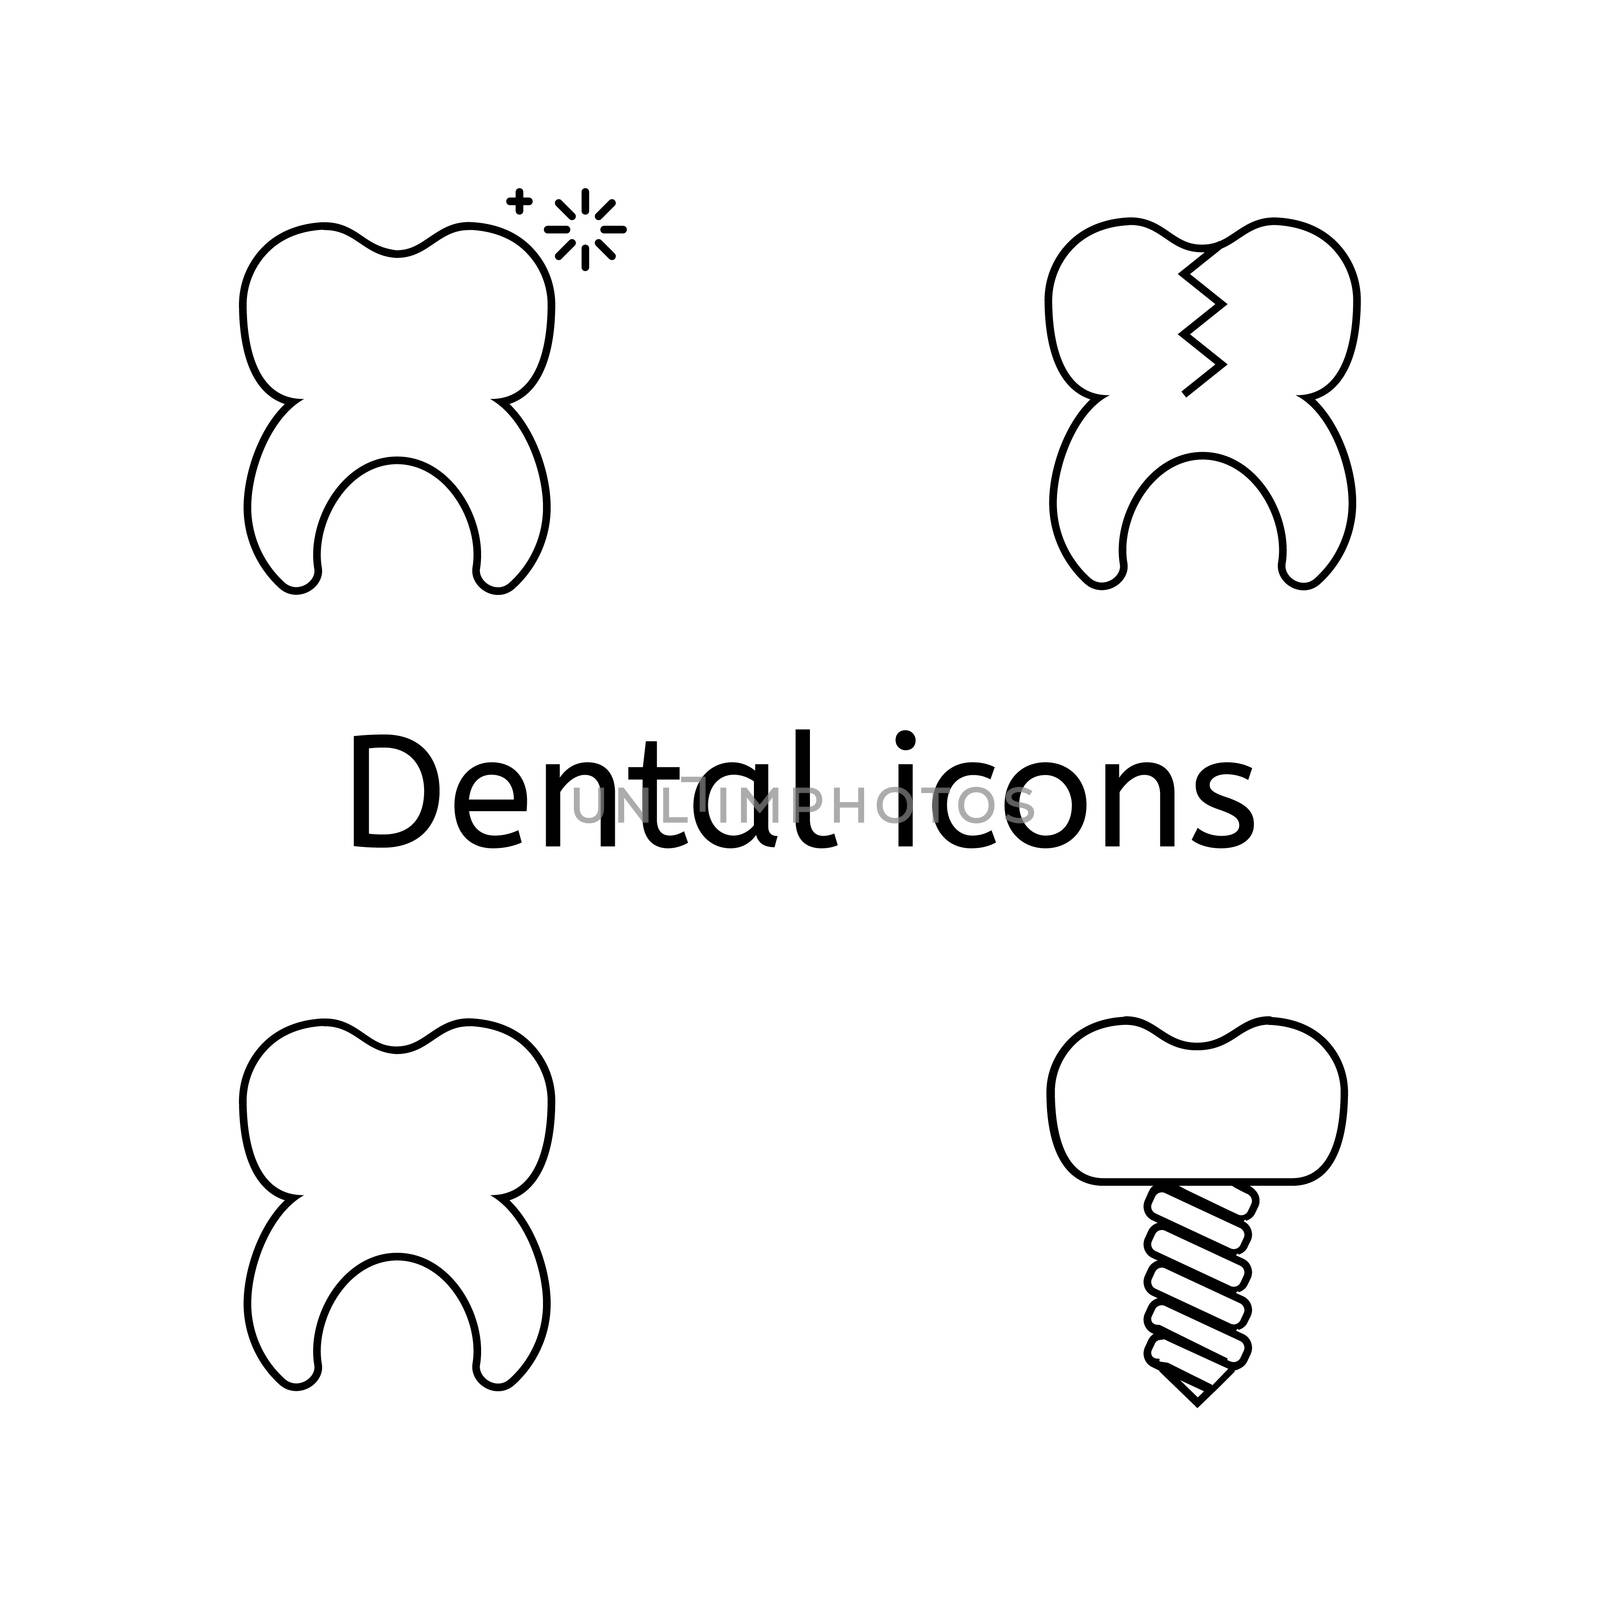 Tooth icons set. Set of dental outline icons. by Elena_Garder